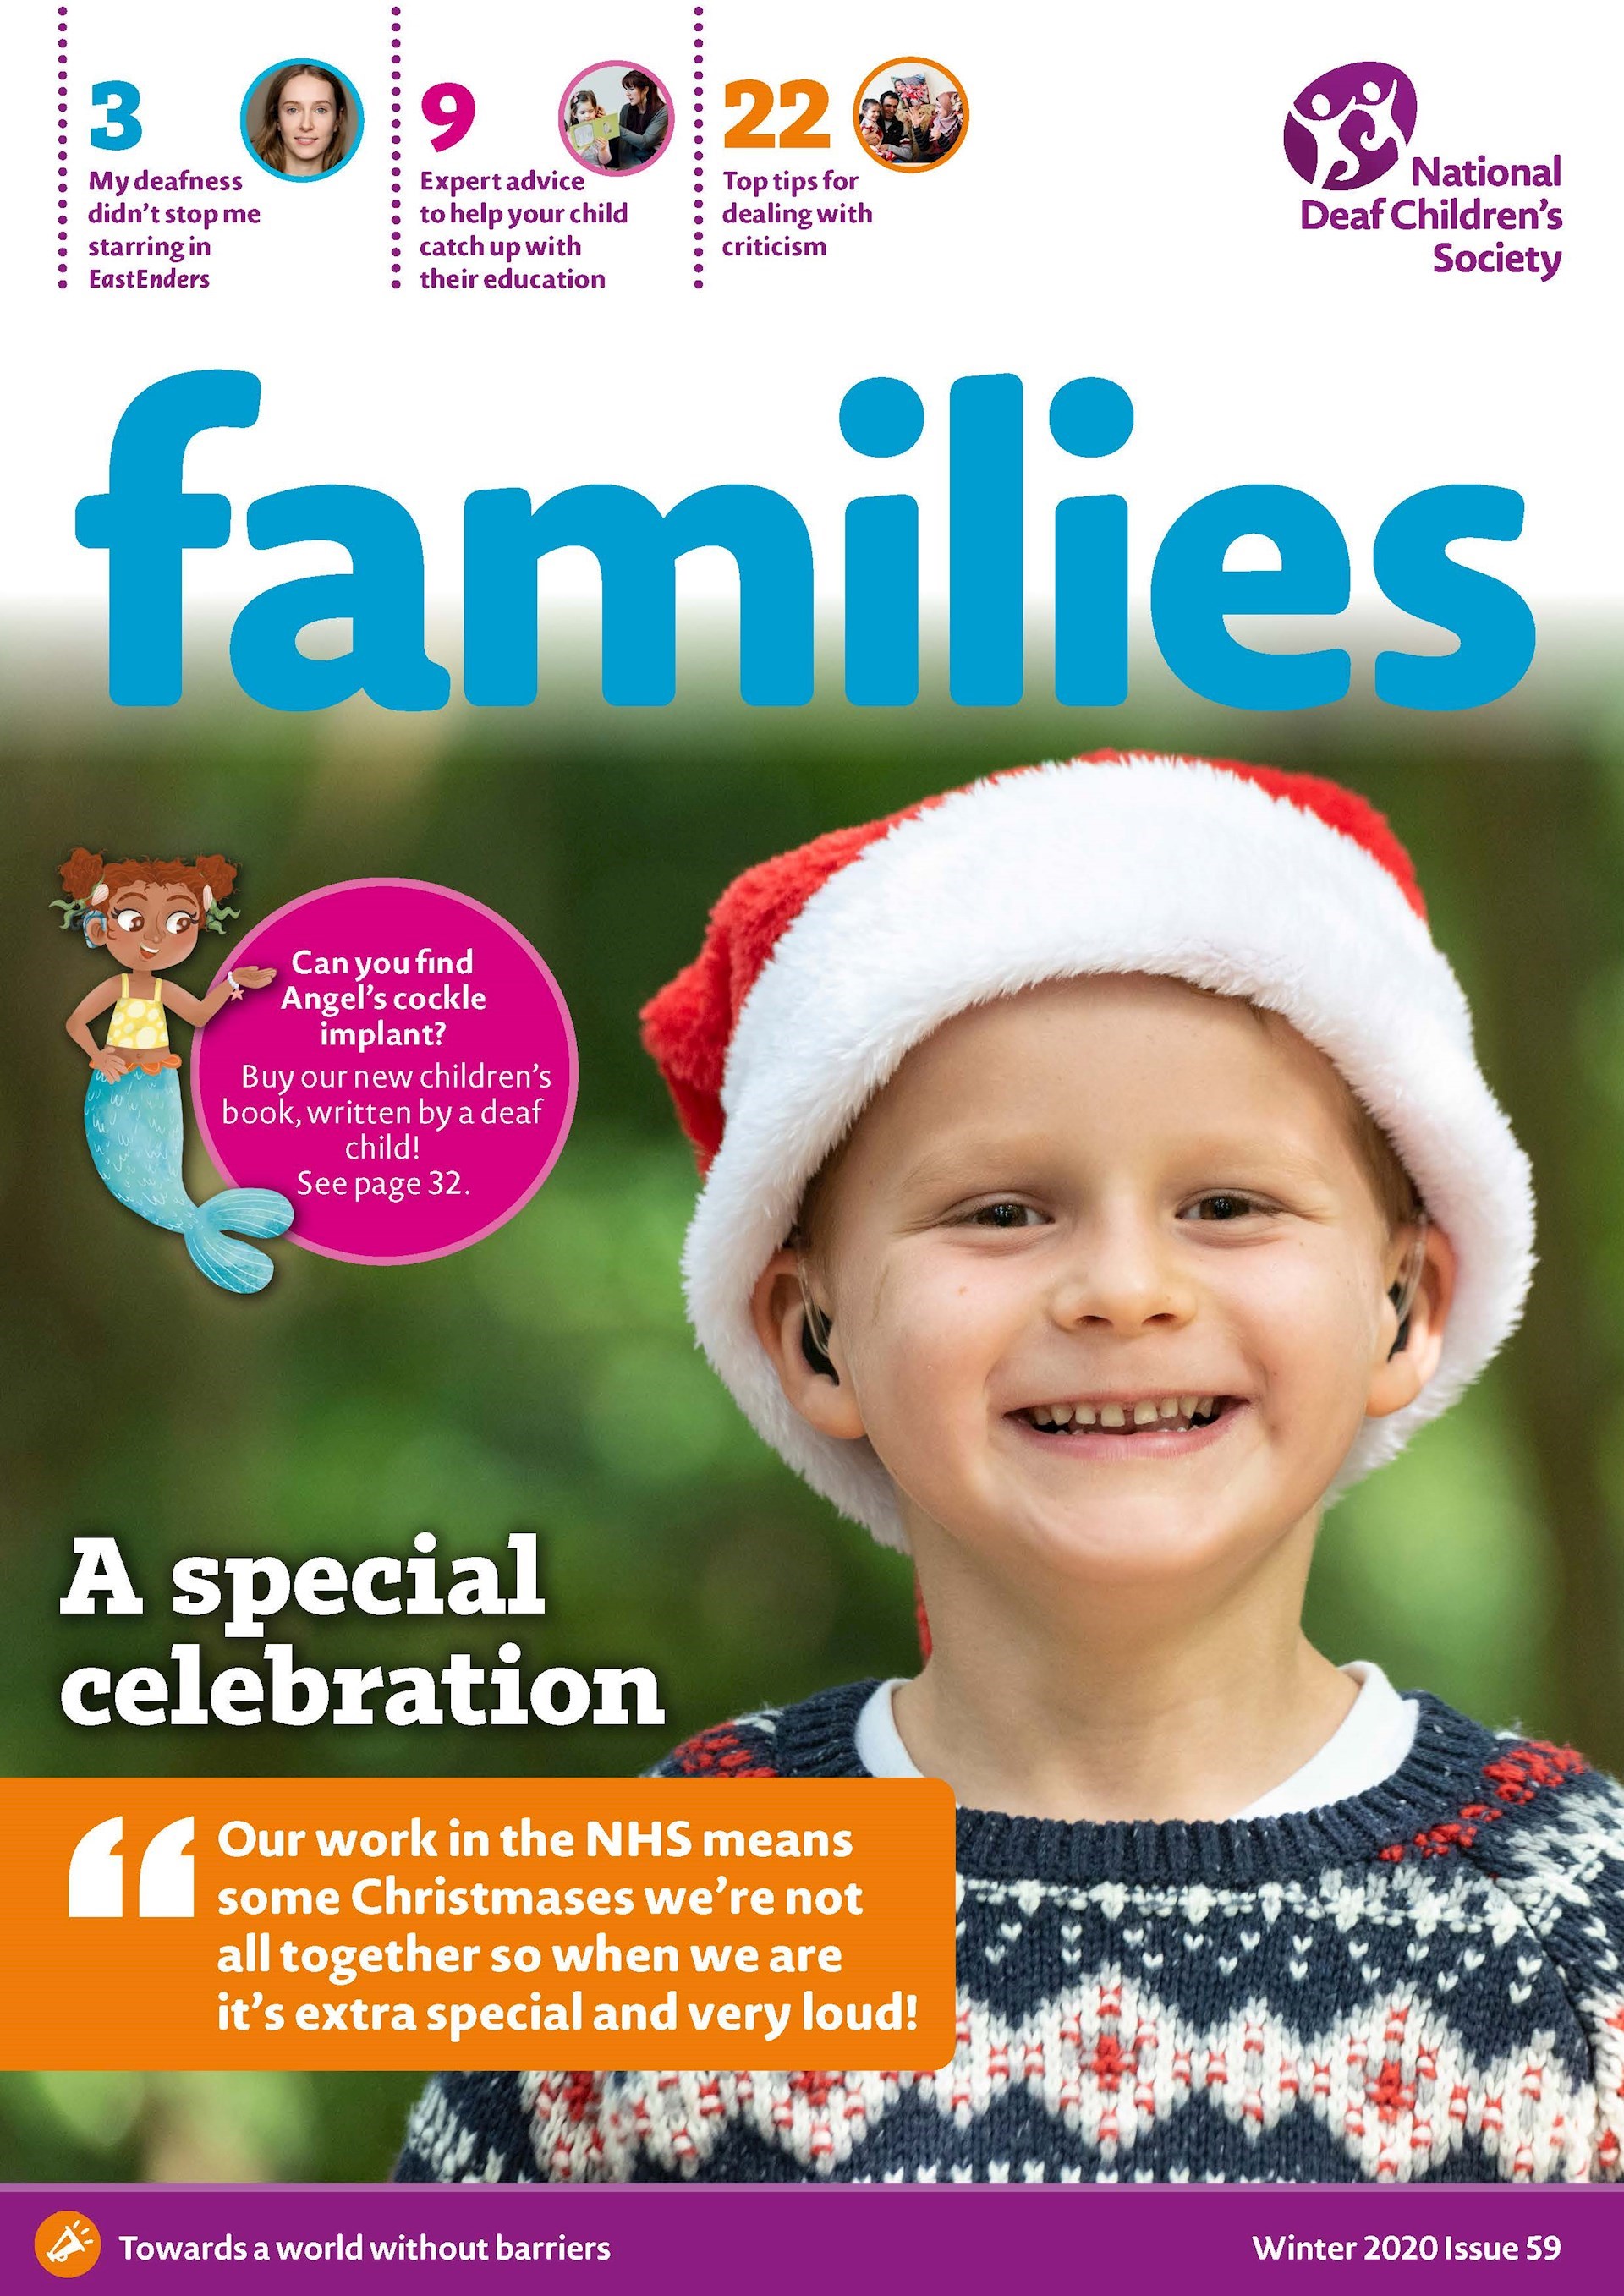 Magazine cover with boy in santa hat